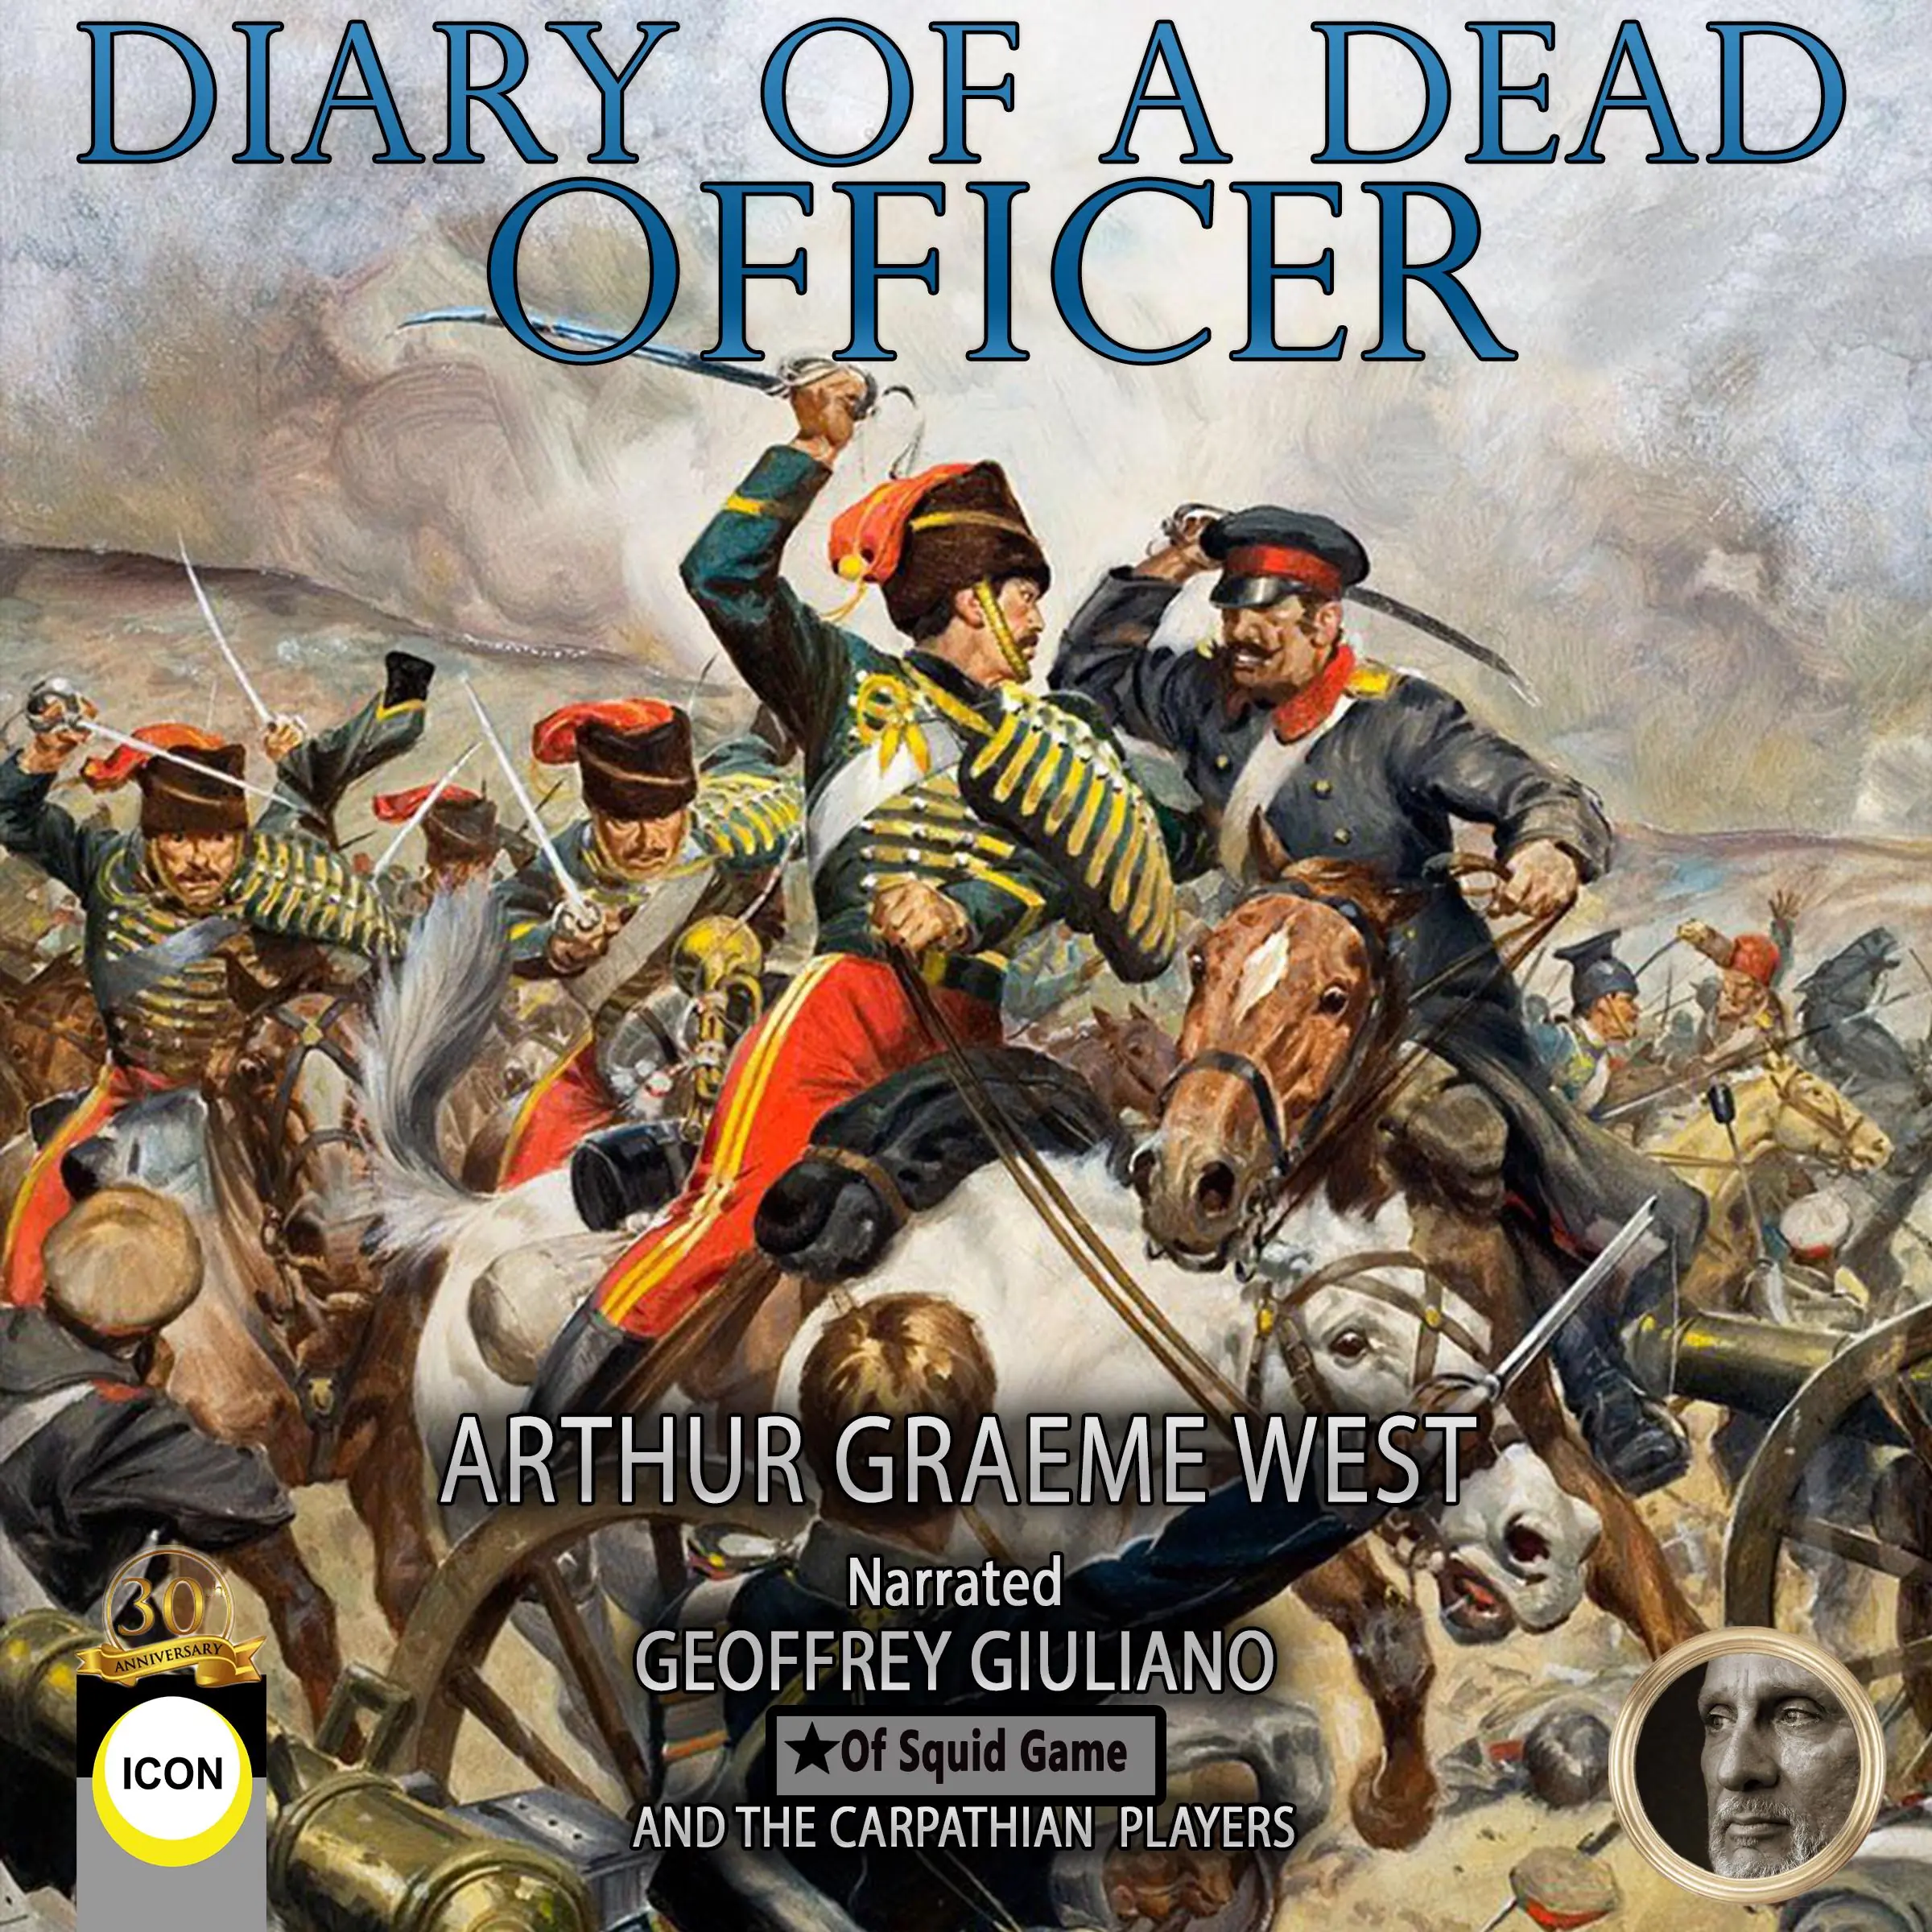 Diary Of A Dead Officer by Arthur Graeme West Audiobook